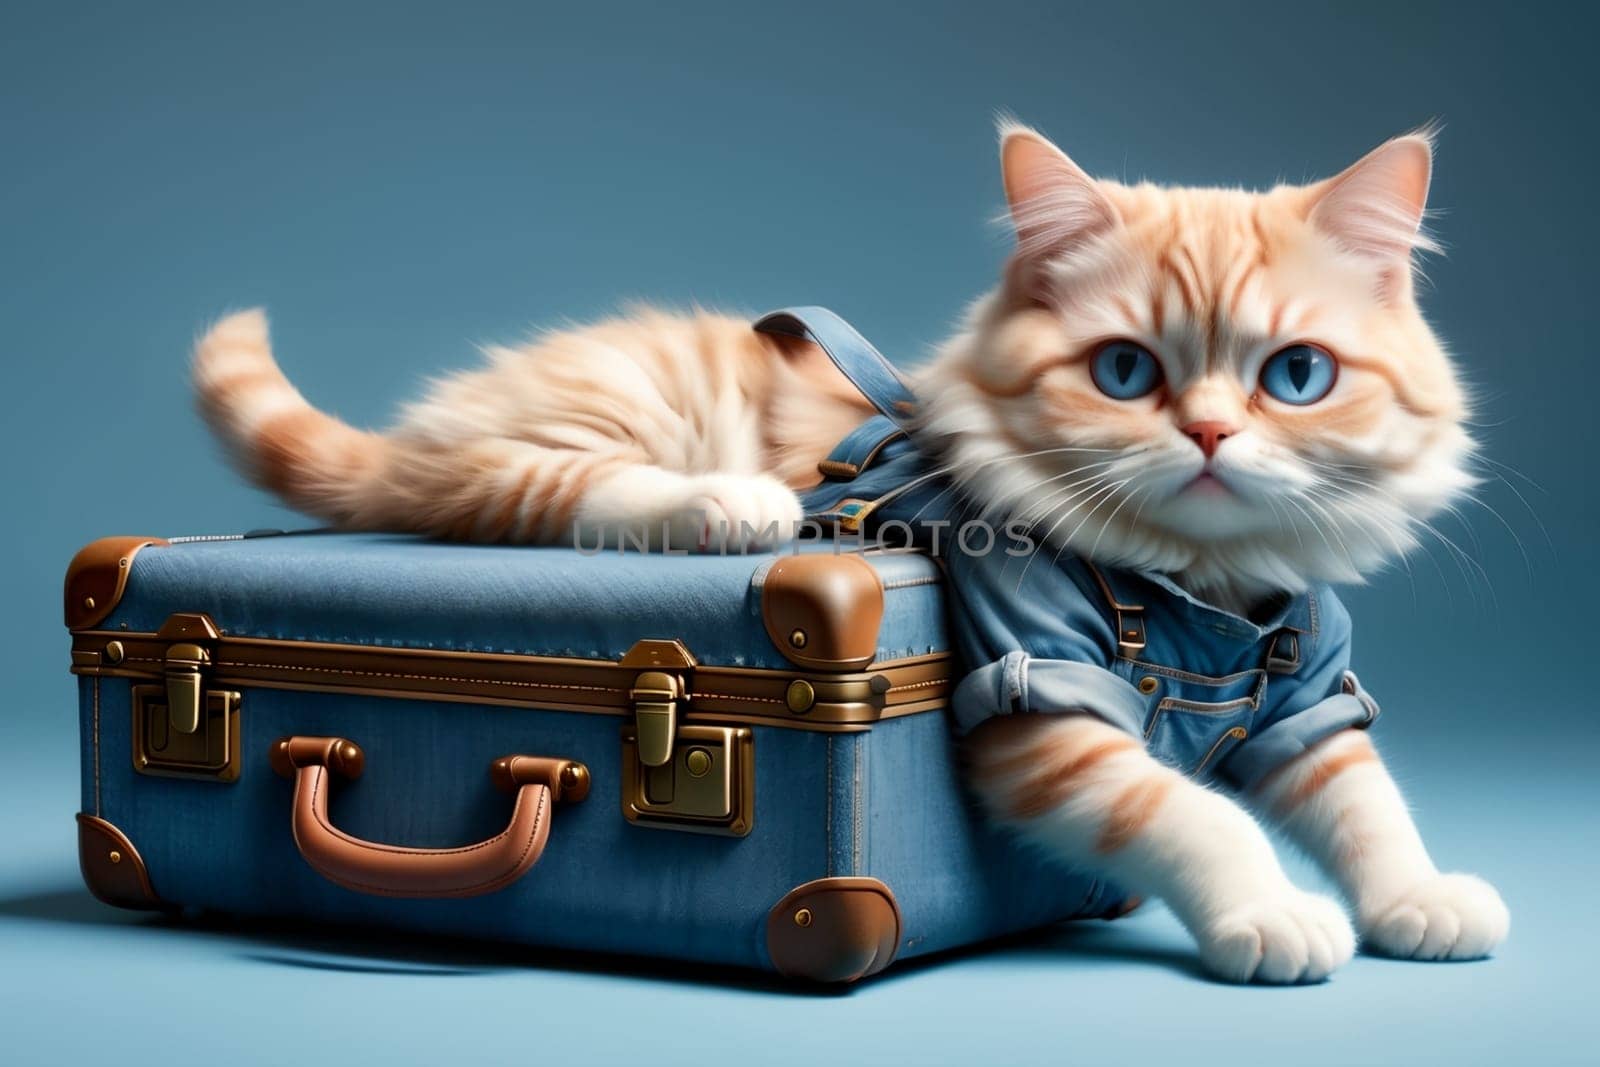 cat with a suitcase, isolated on a blue background, art by Rawlik